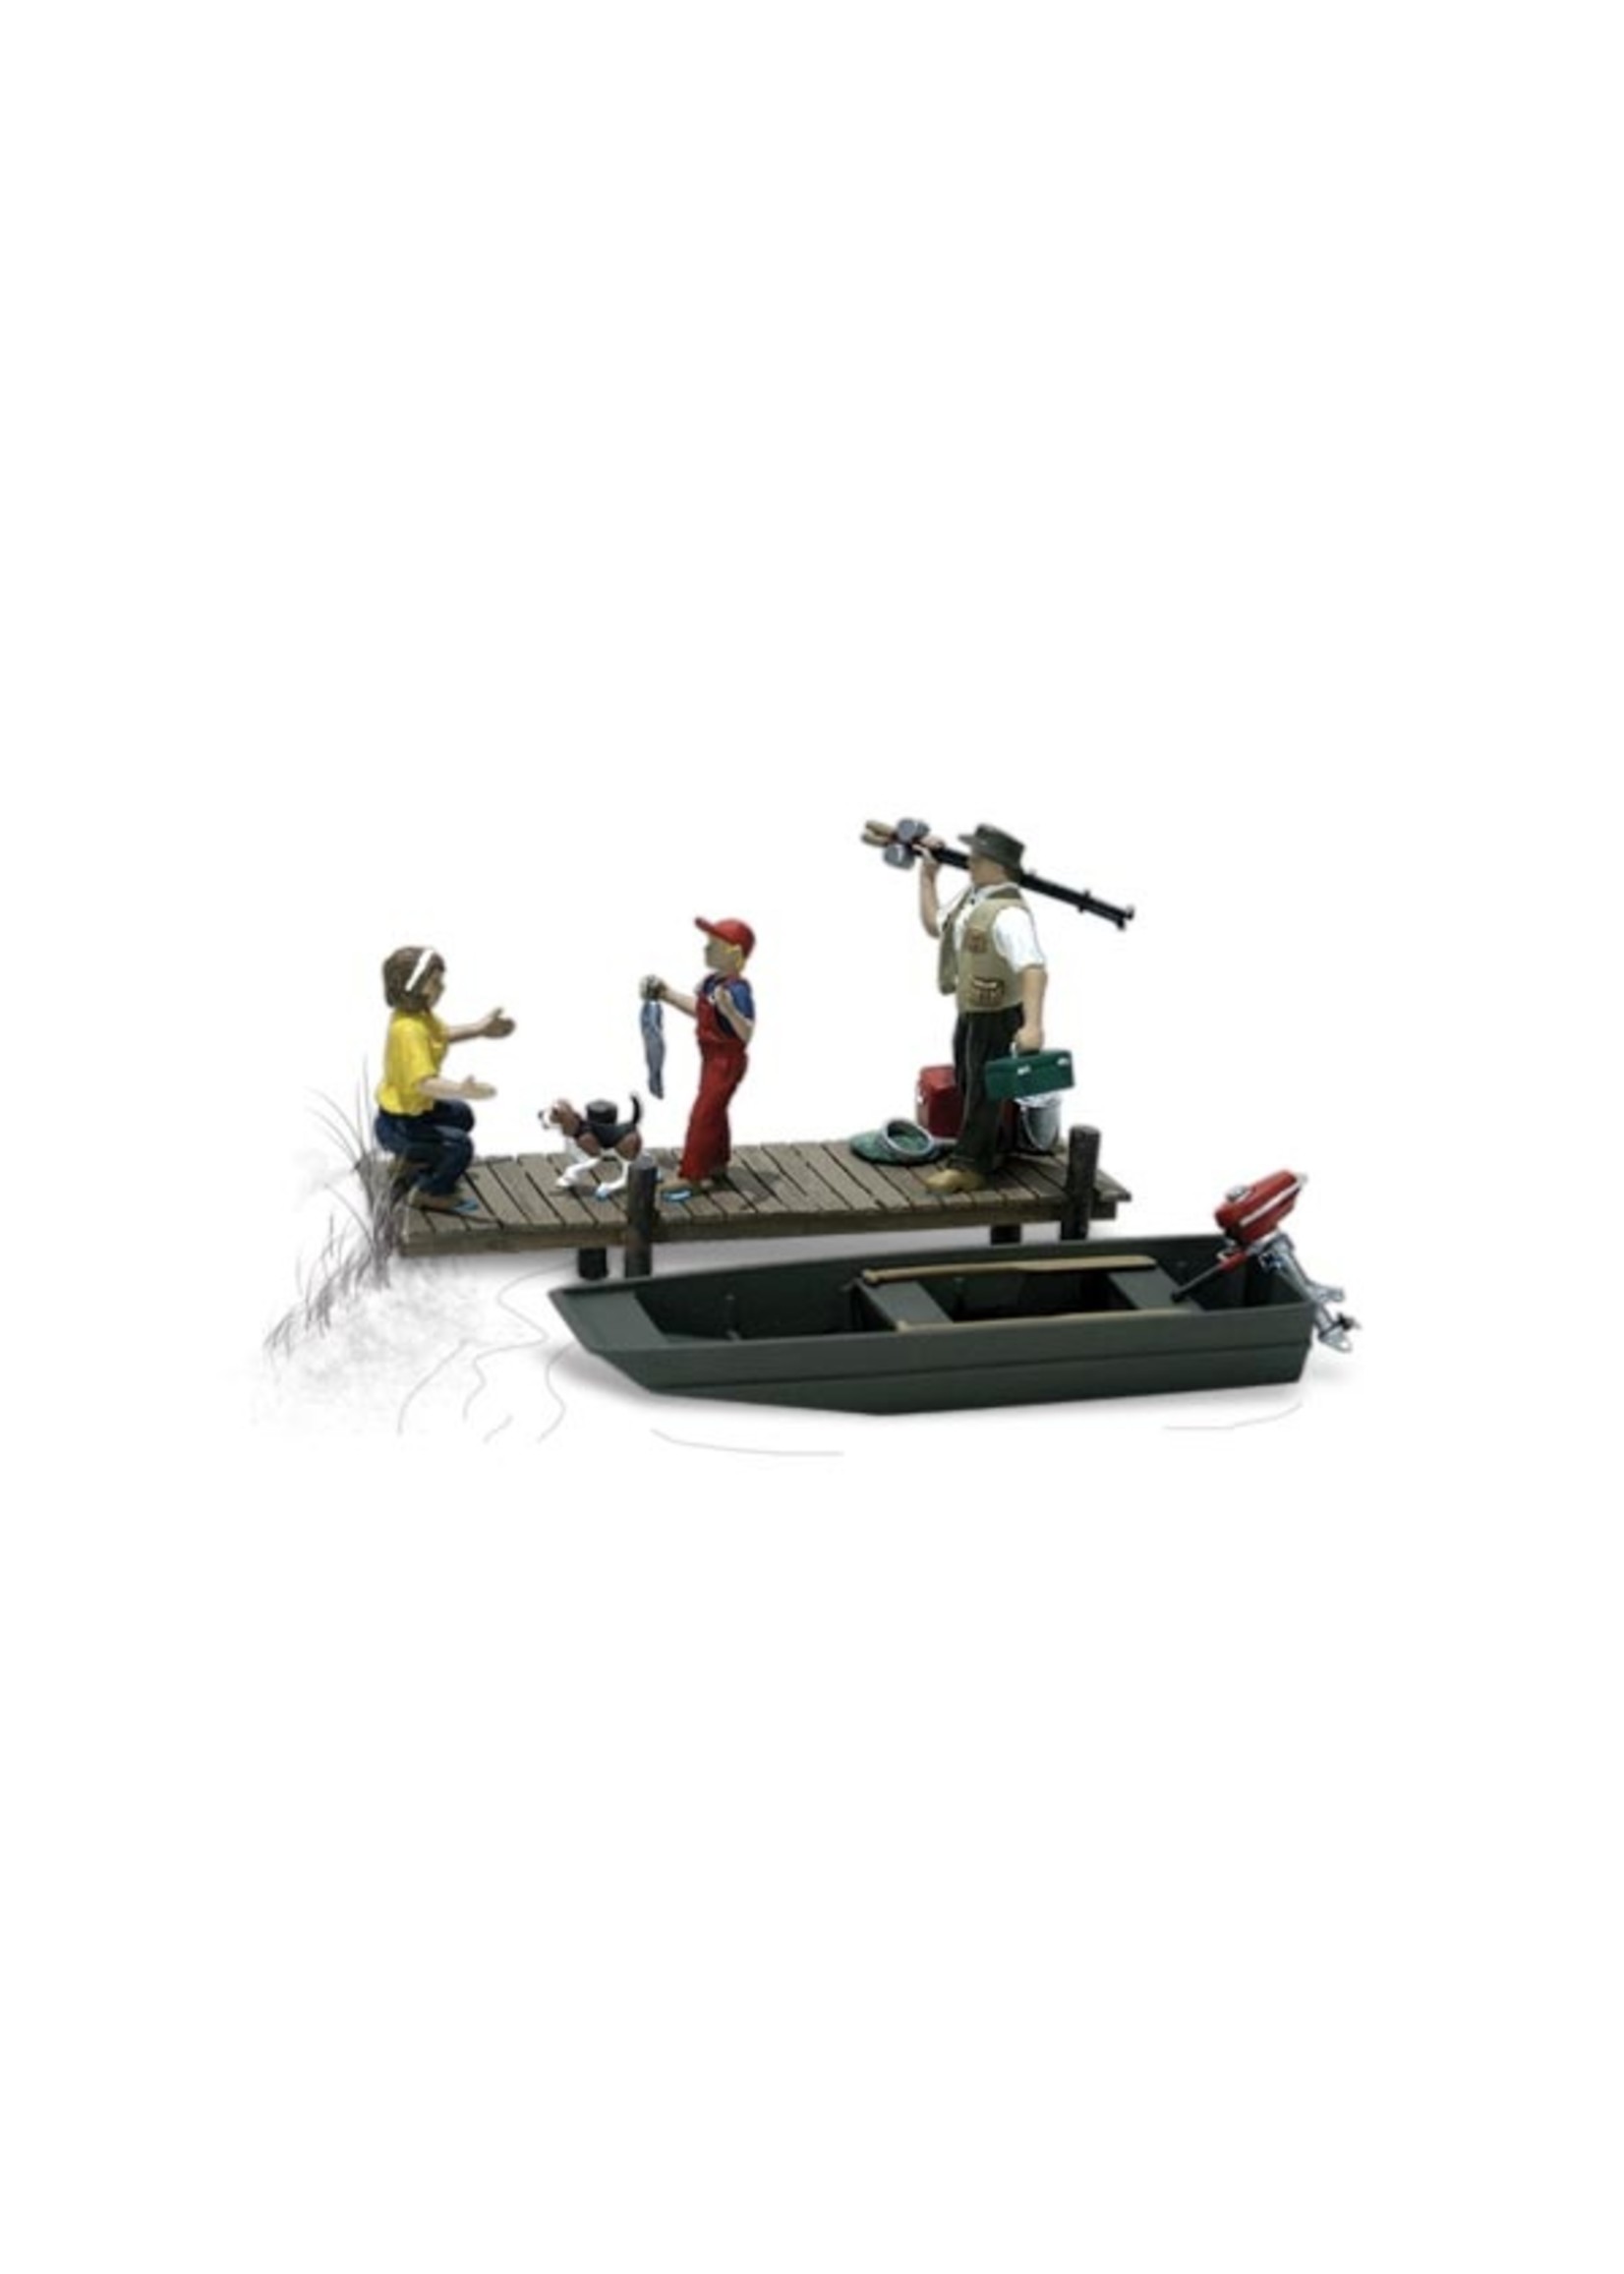 Woodland Scenics A2203 - N Scale Family Fishing